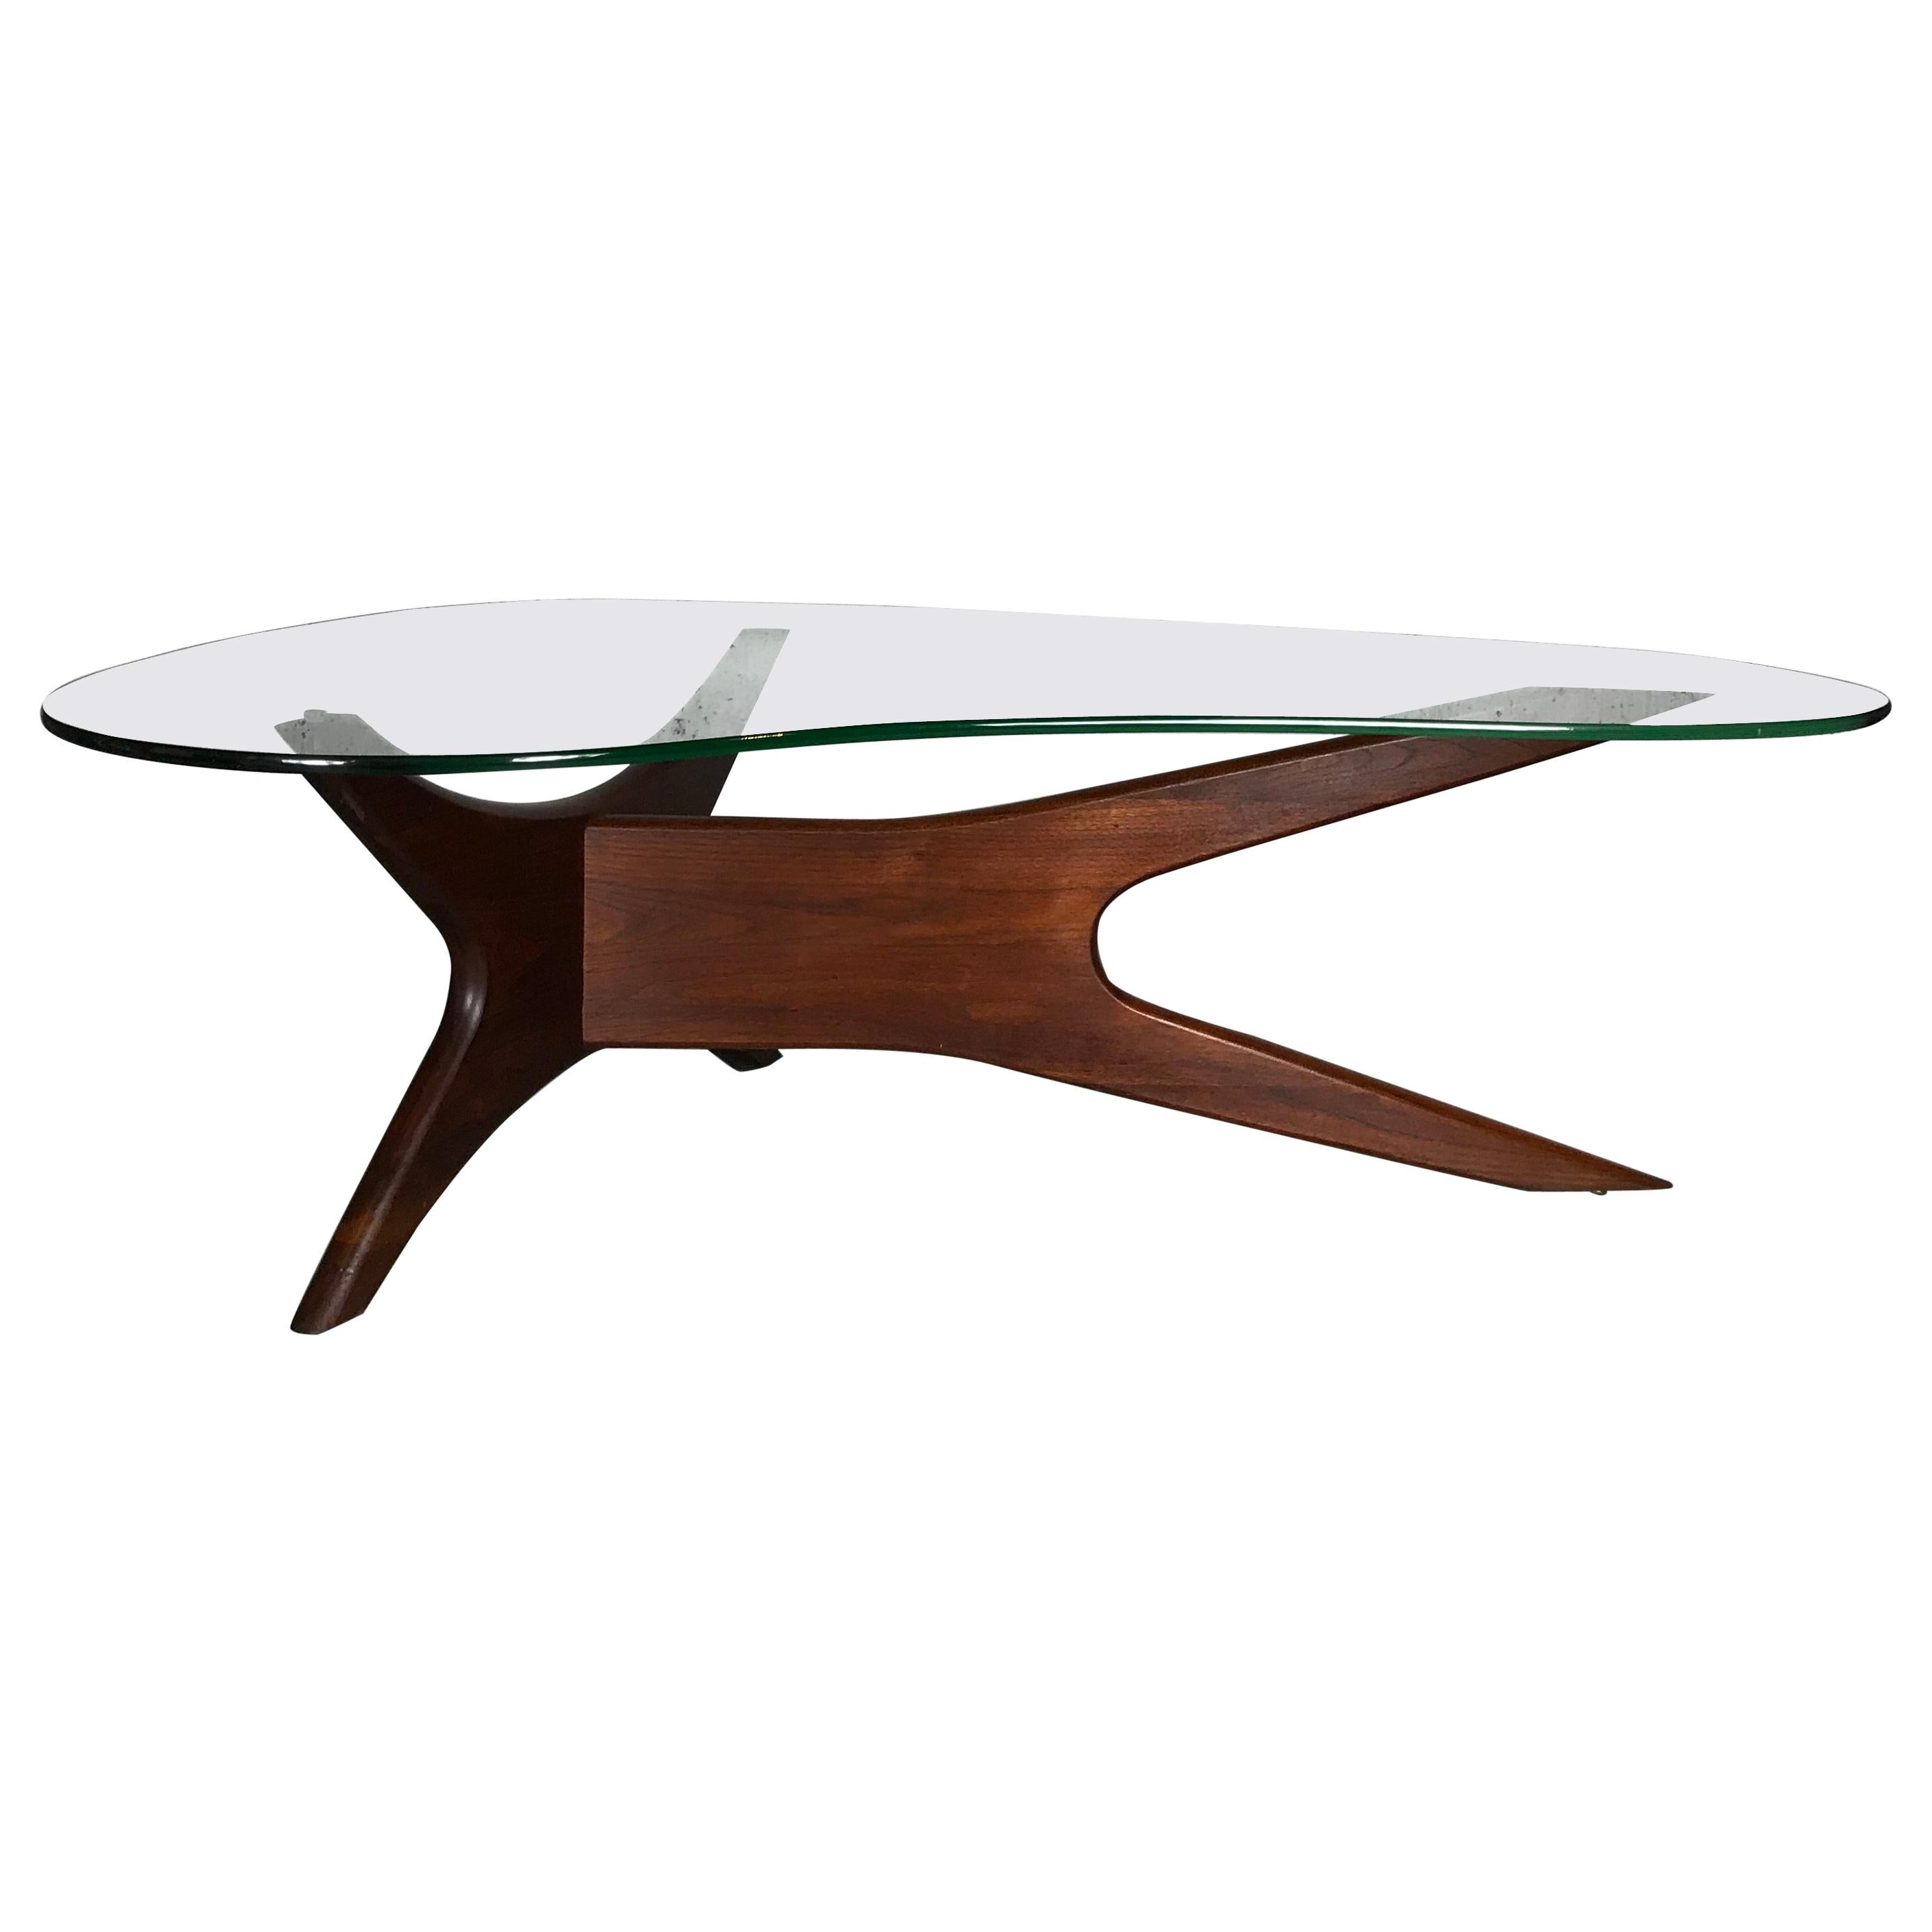 Sculptural Walnut & Glass Cocktail Table by Adrian Pearsall for Craft Associates